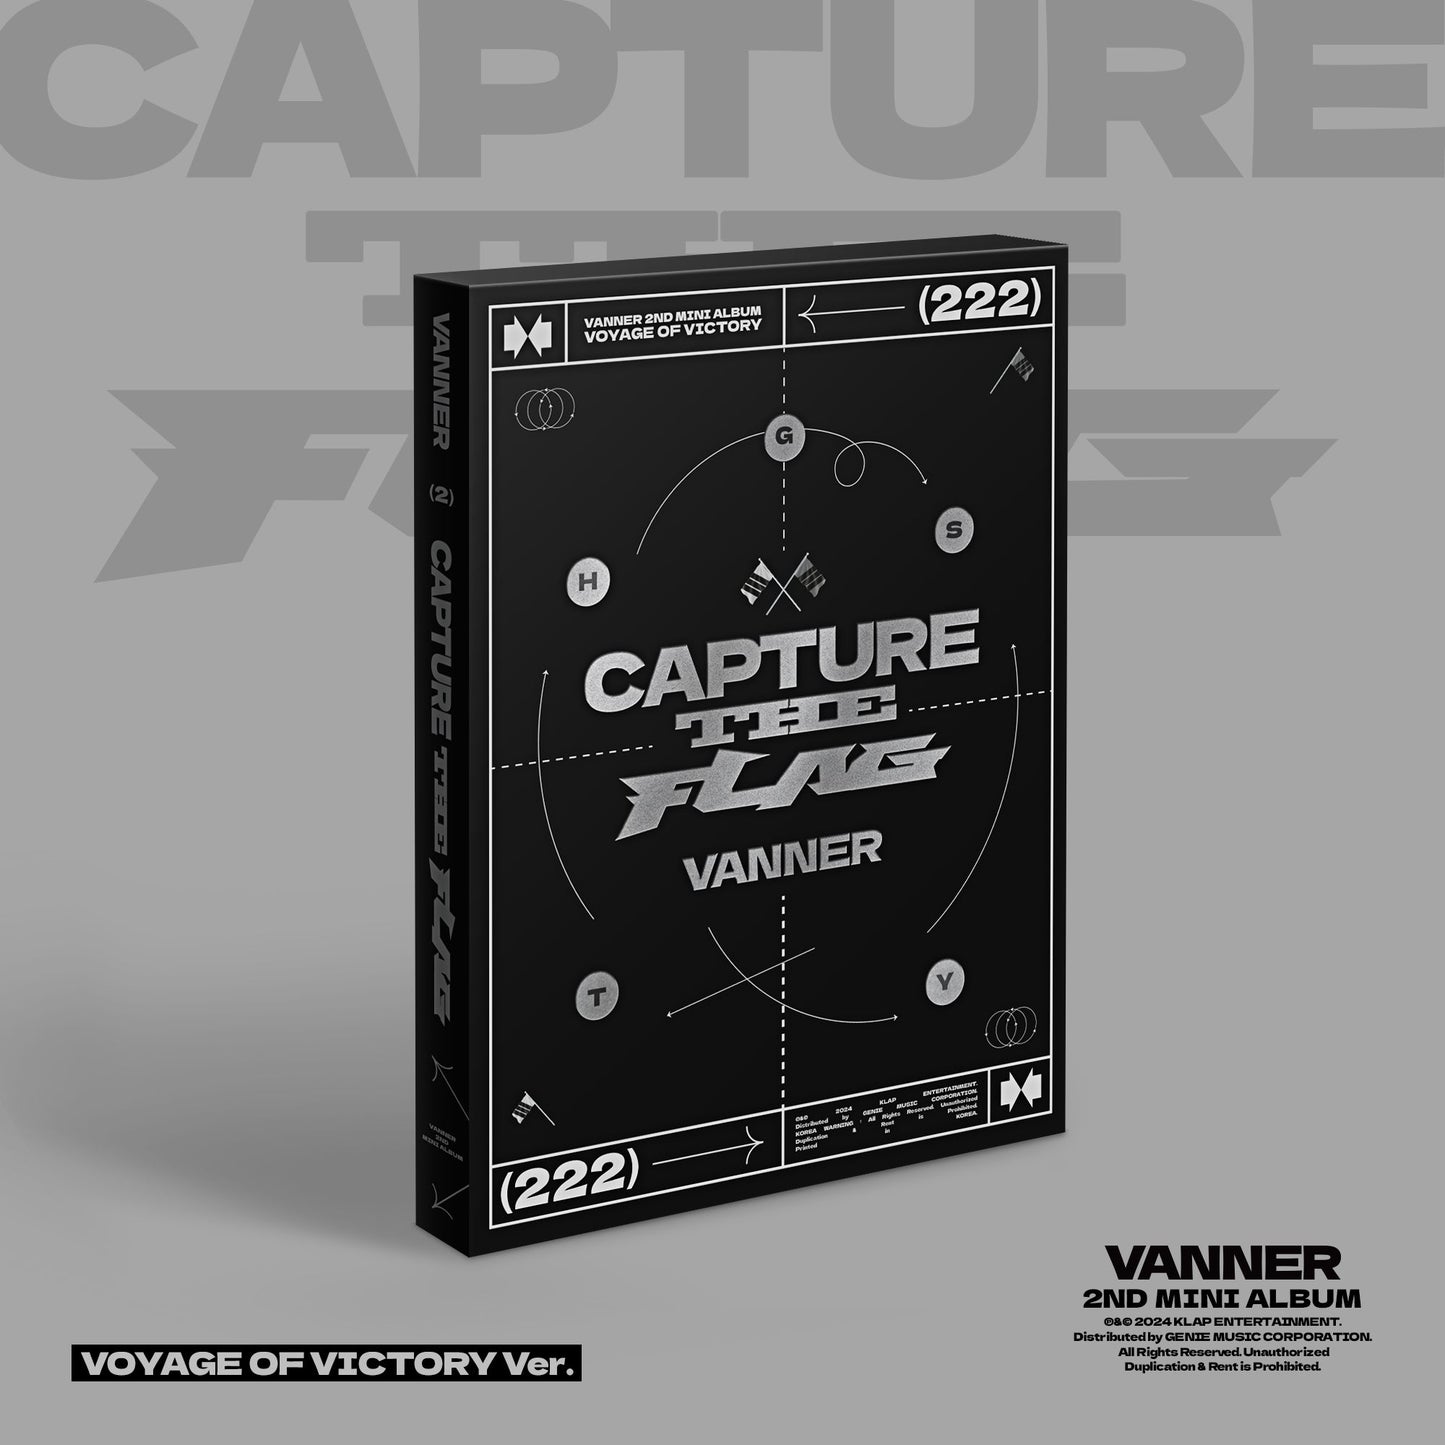 VANNER 2ND MINI ALBUM 'CAPTURE THE FLAG' VOYAGE OF VICTORY VERSION COVER